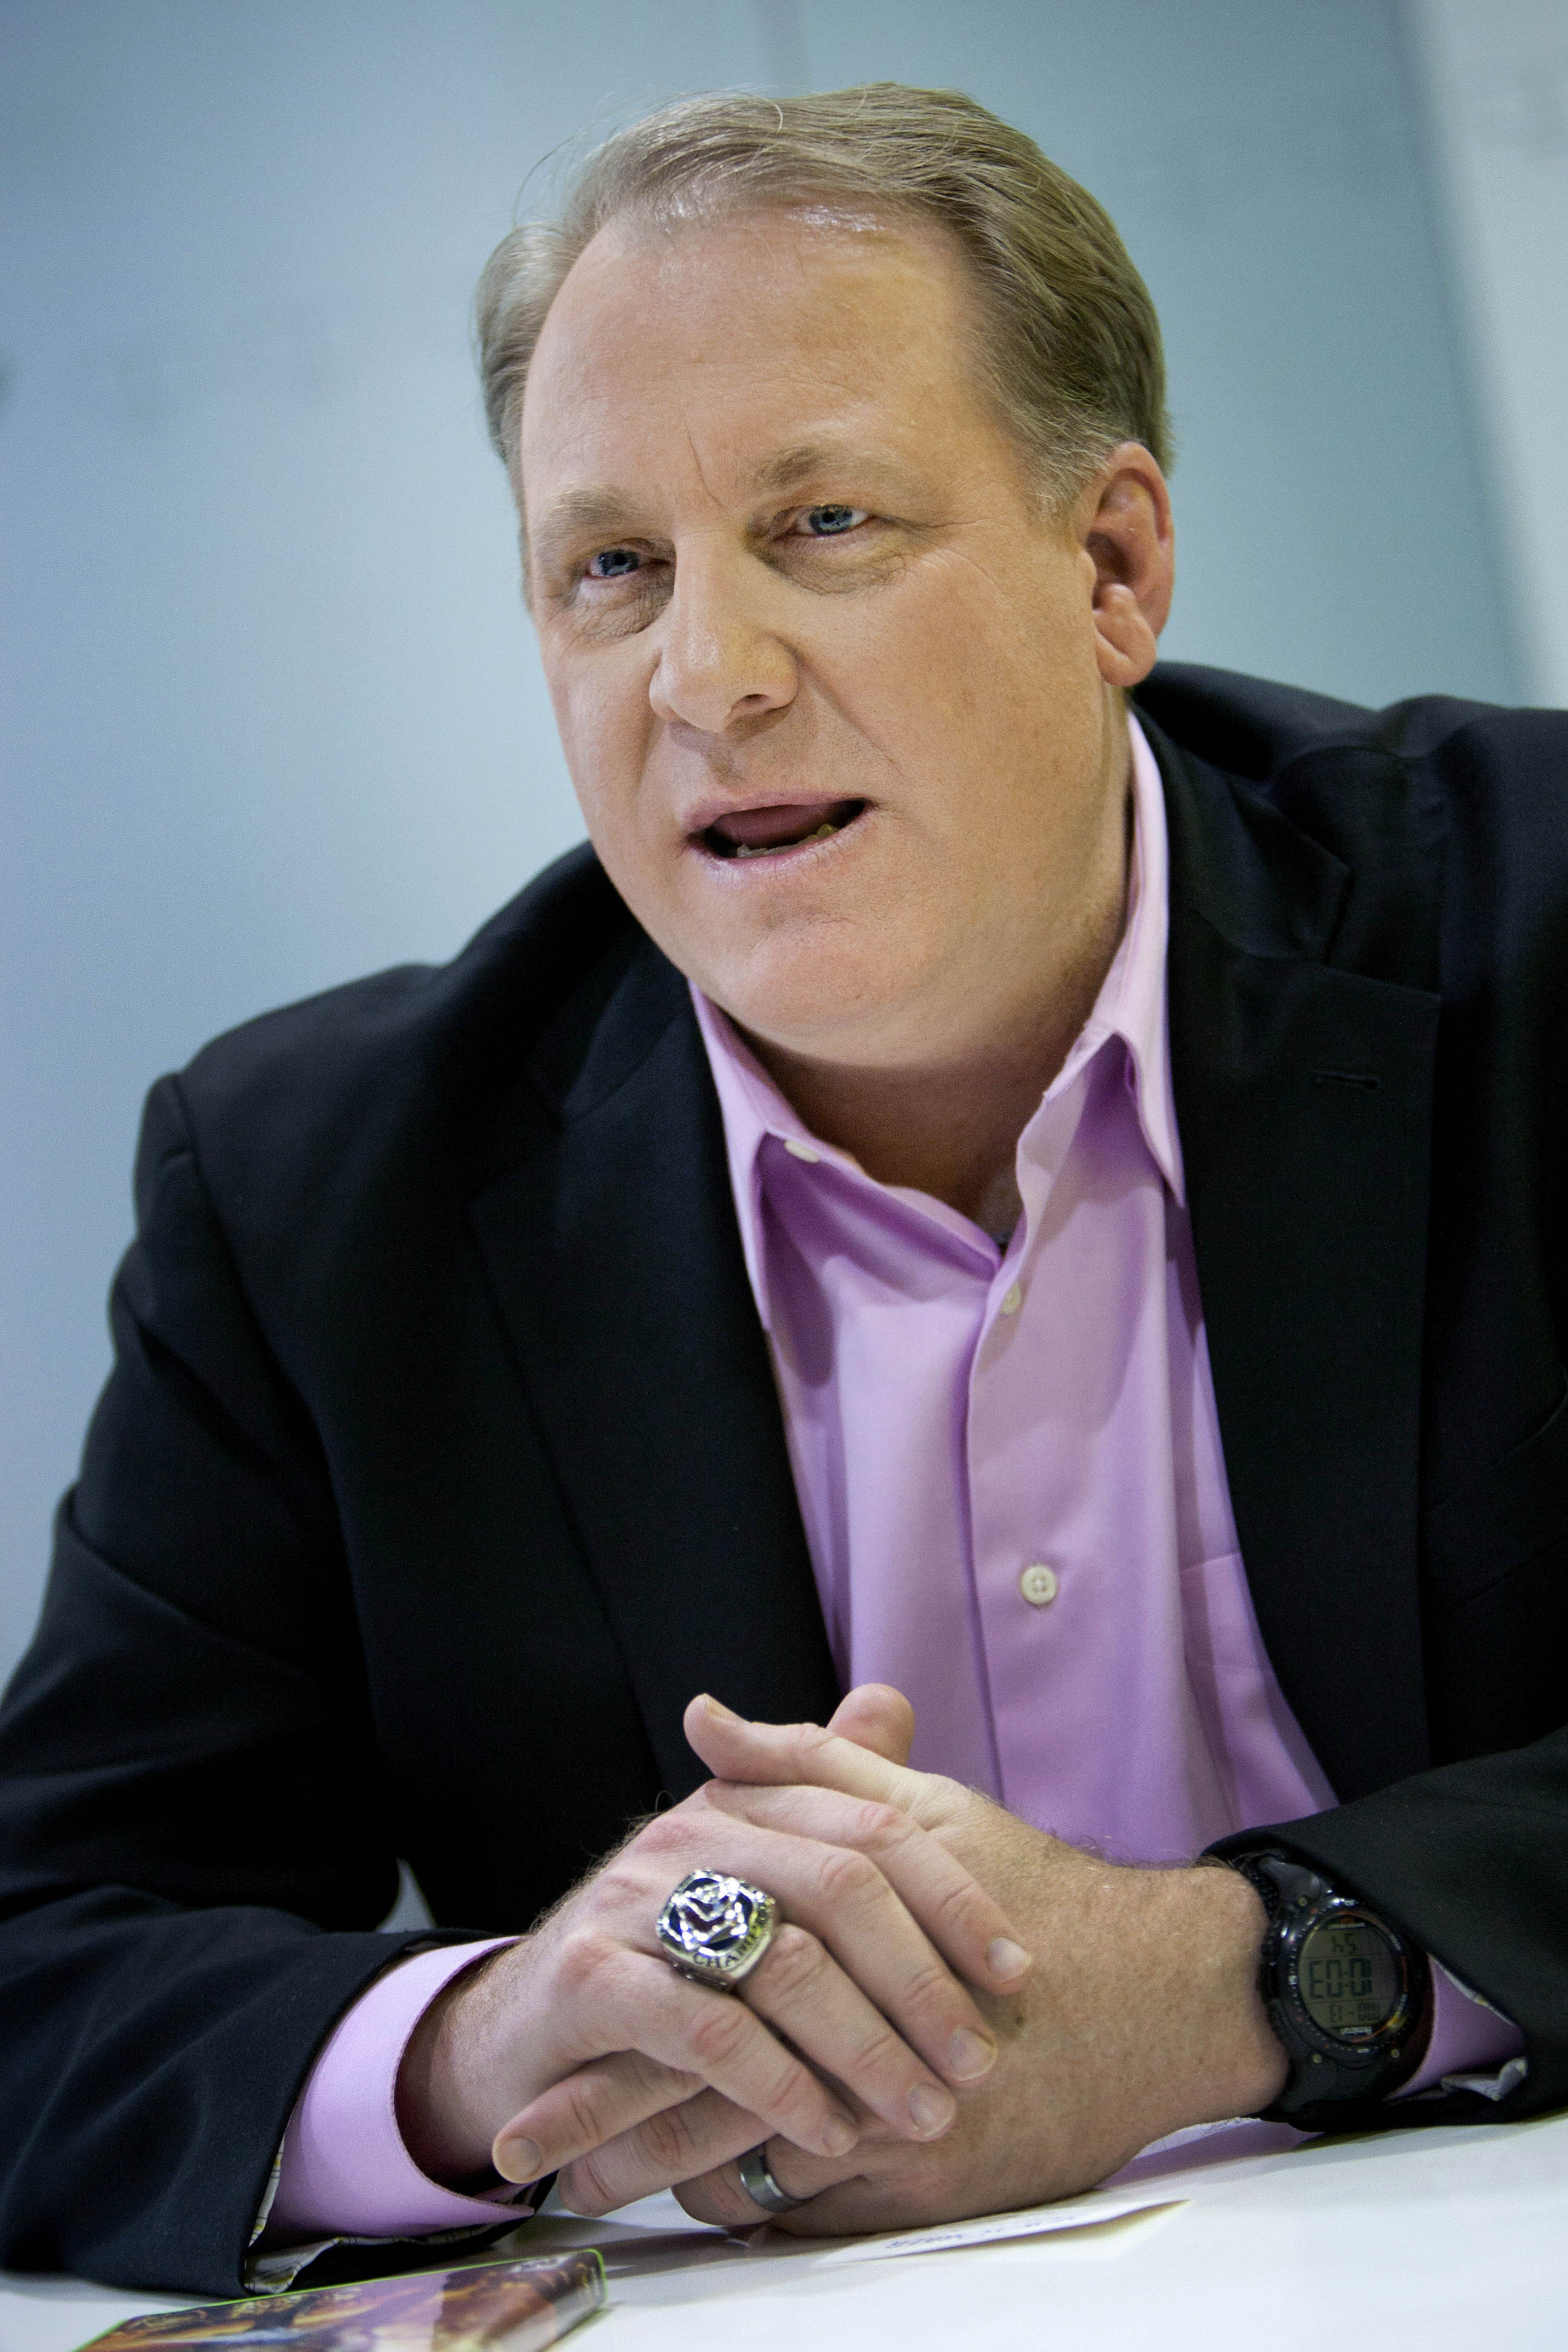 curt shilling suspension broadcasts